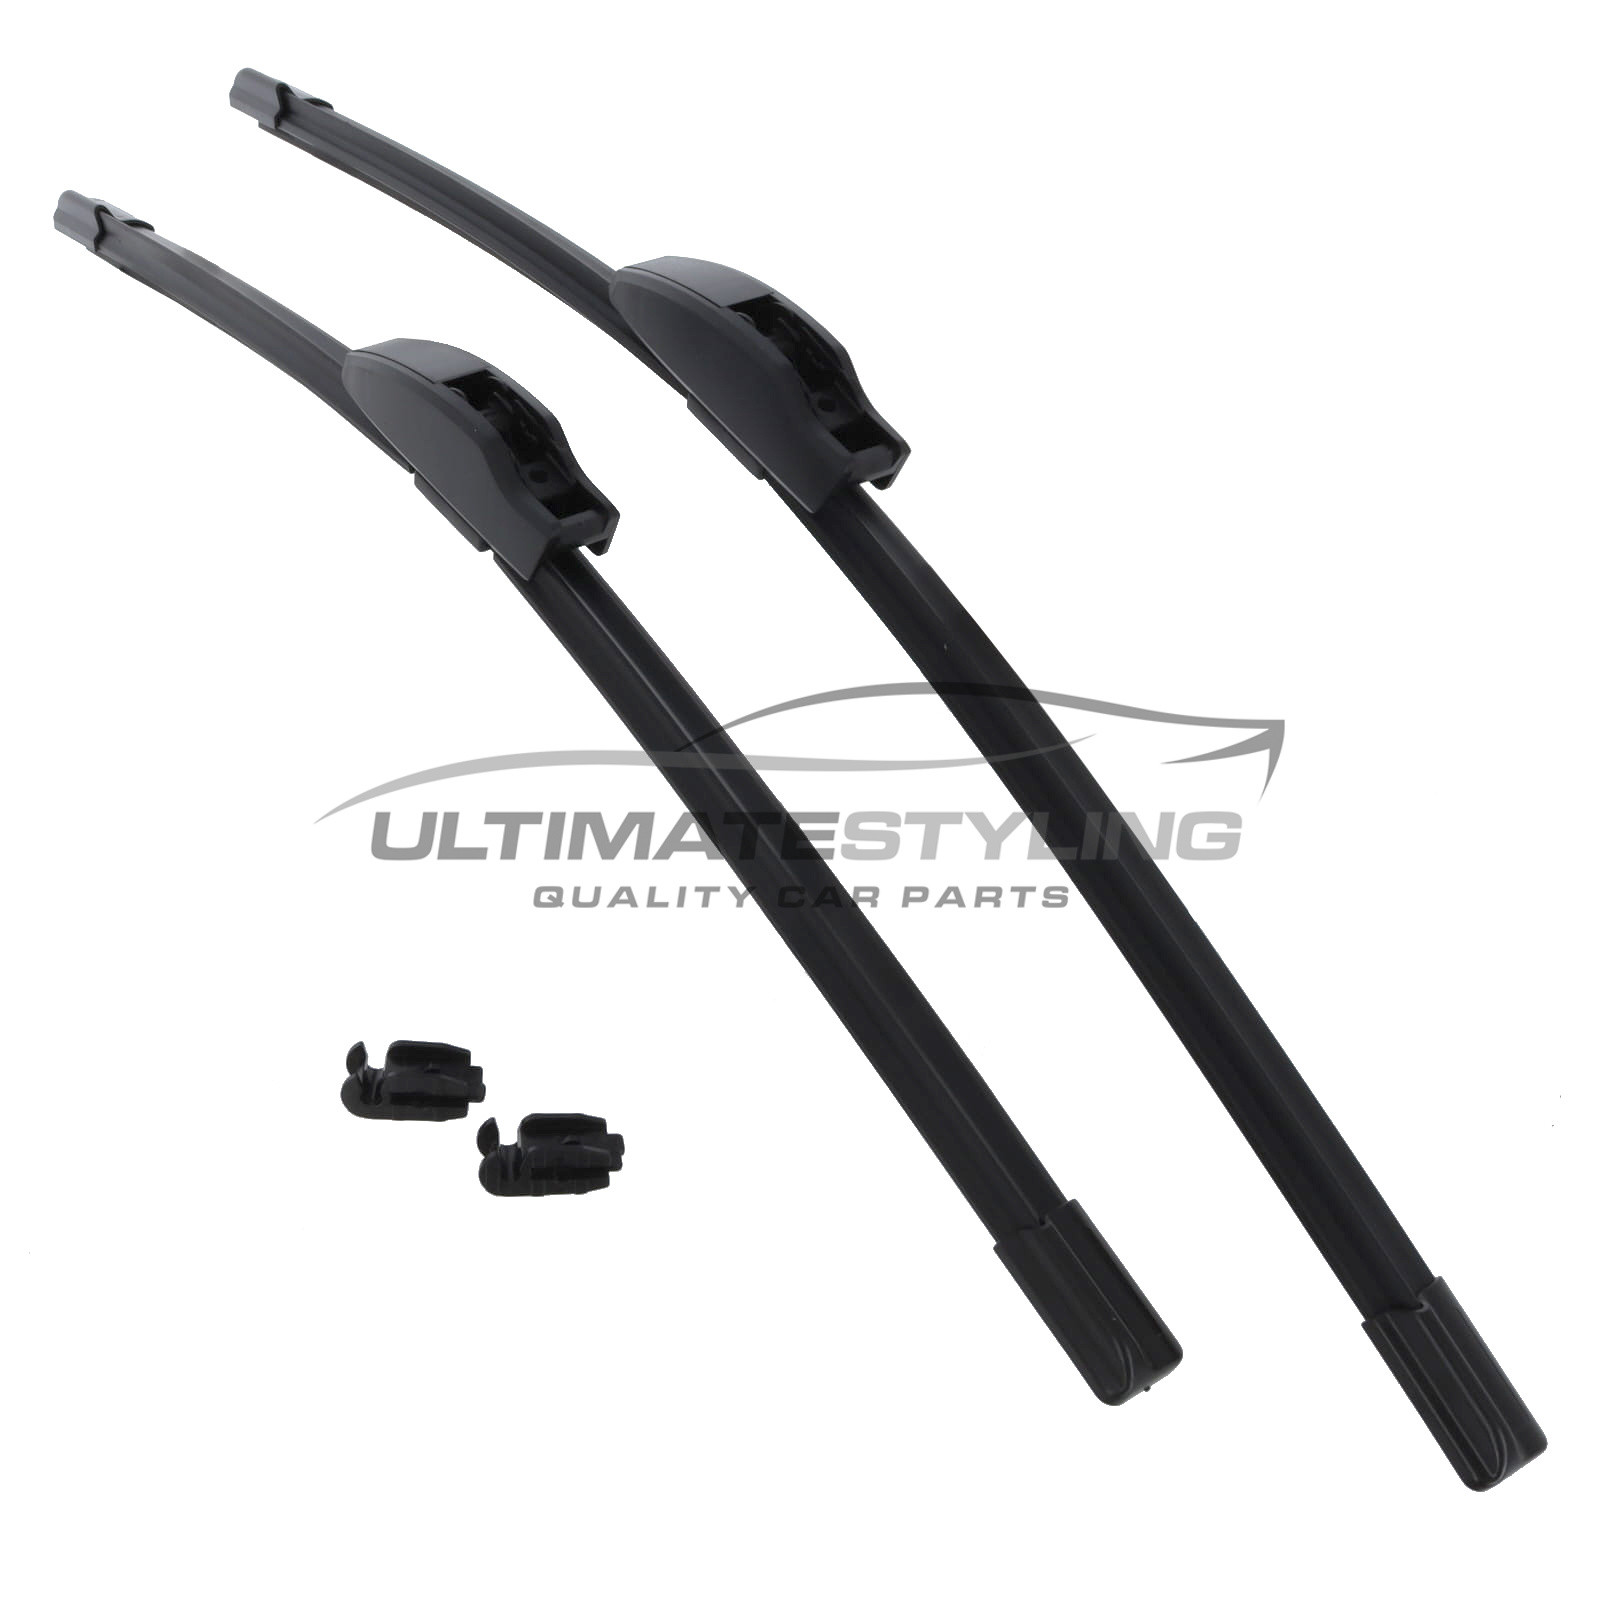 Drivers Side & Passenger Side (Front) Wiper Blades for Proton Persona